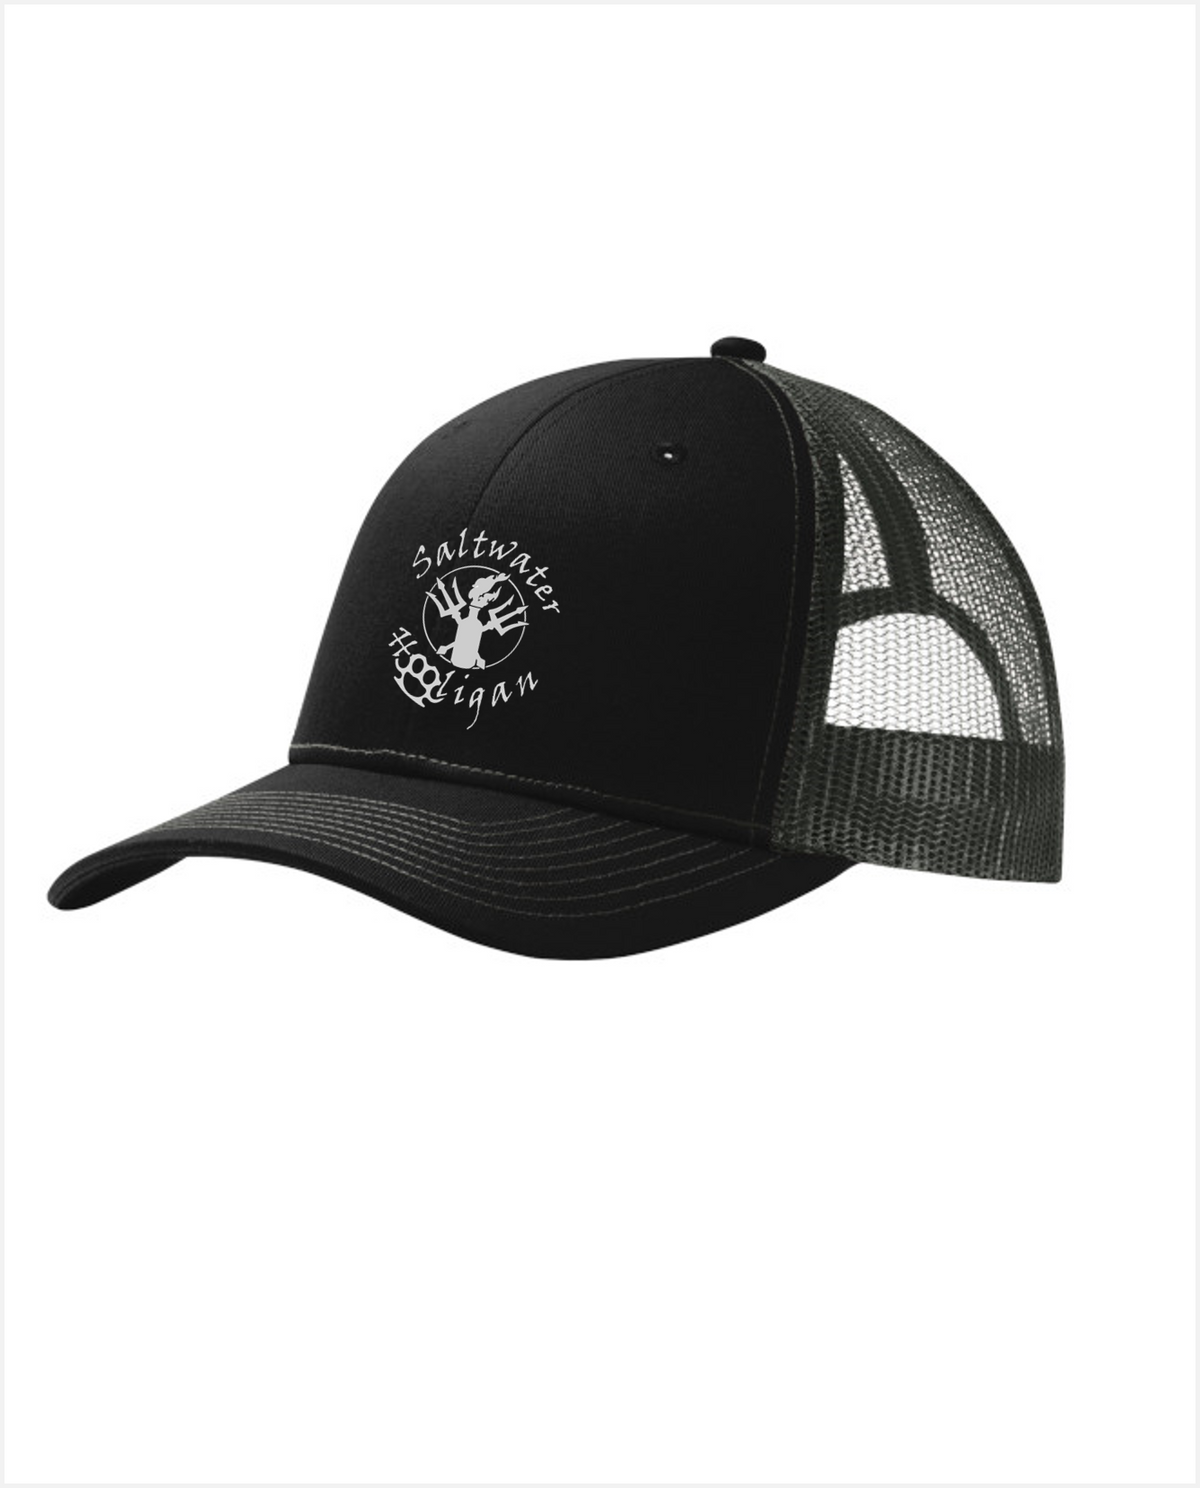 SALTWATER HOOLIGAN EMBROIDERED AND FISHING TRUCKER CAP